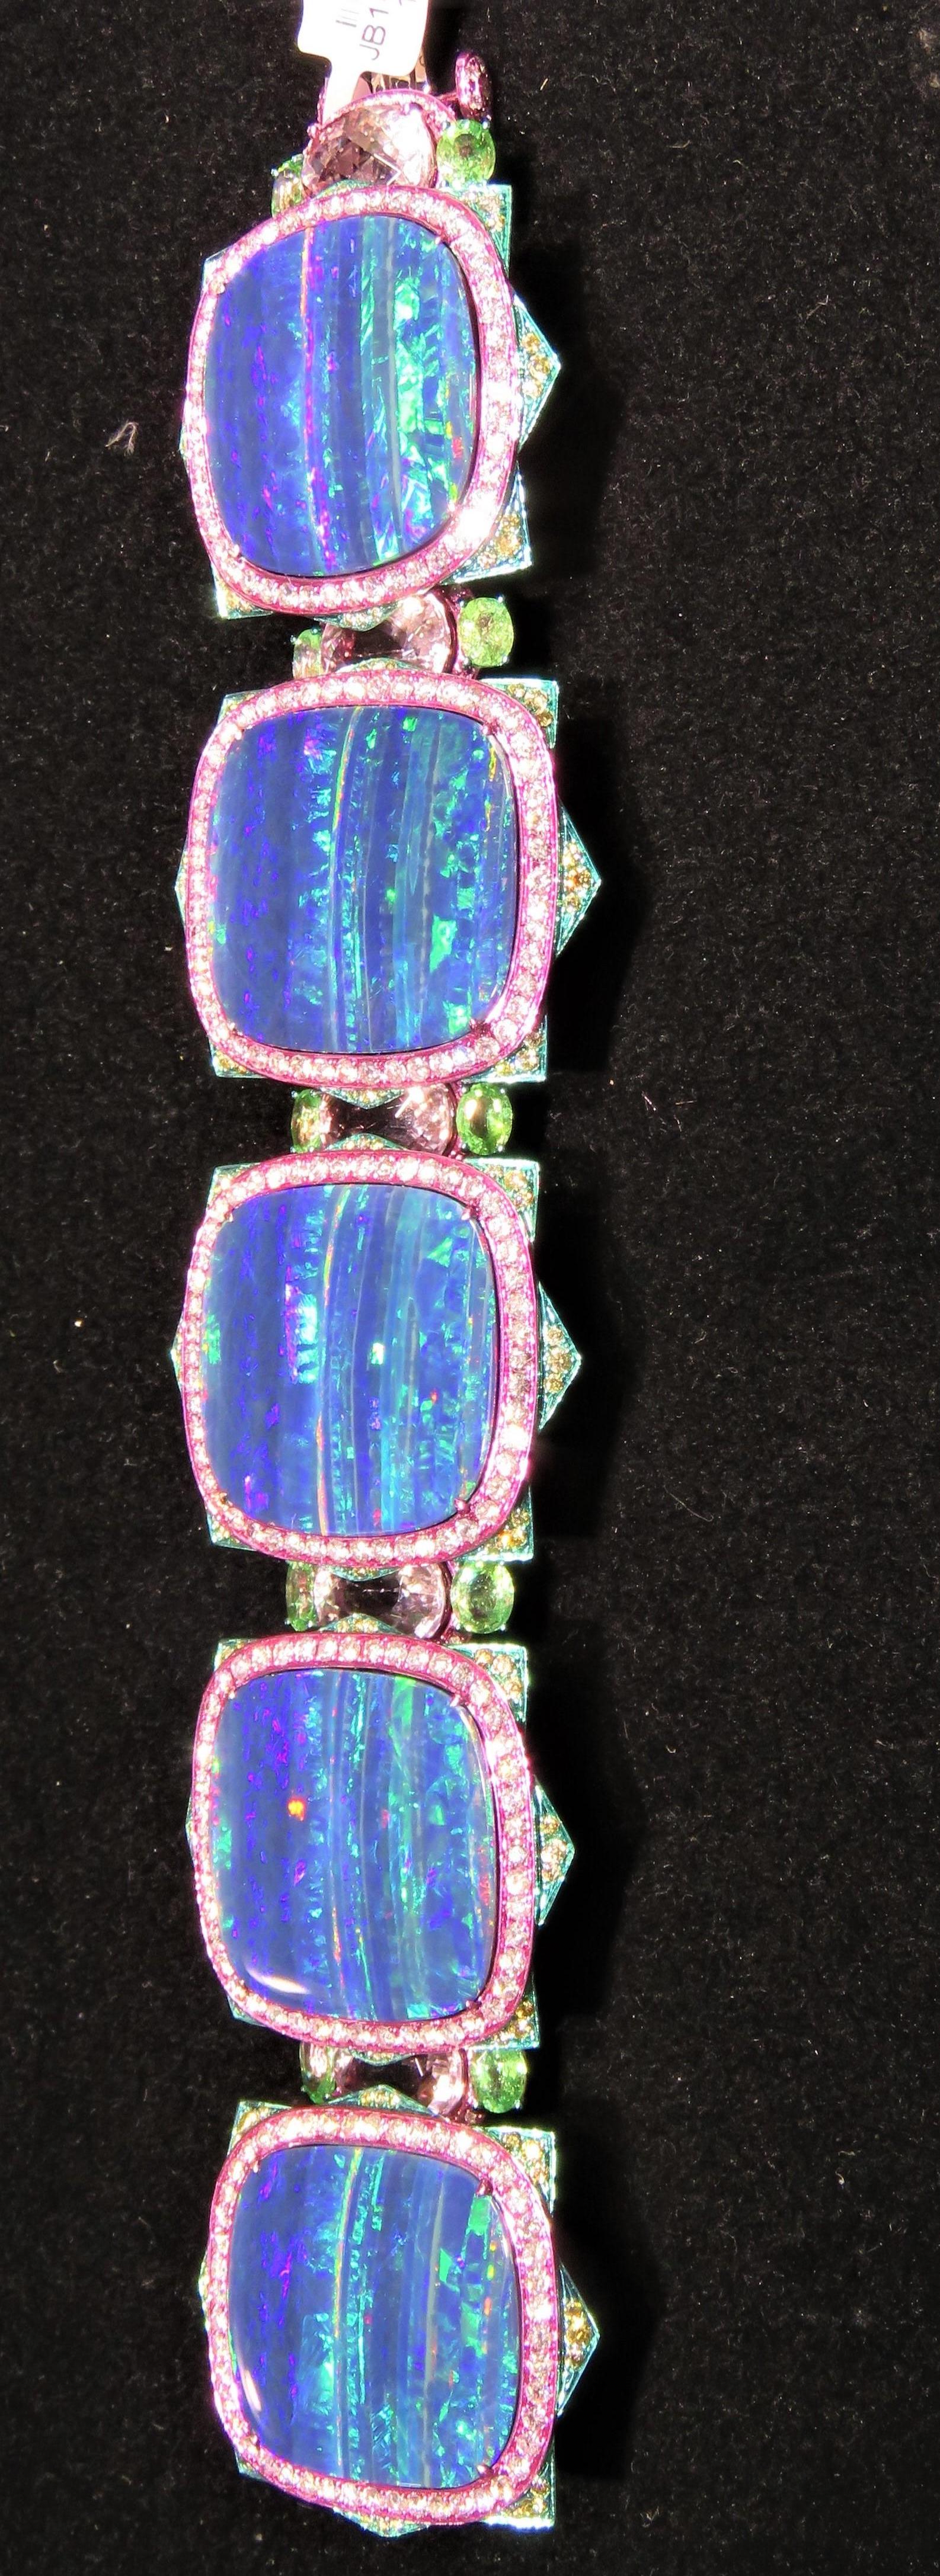 The Following Items we are offering is a Rare Important Radiant 18KT Gold Glistening Magnificent Large Fancy Black Opal Gorgeous Rare Paraiba, Morganite and Diamond Bracelet. Bracelet features Exquisite Fancy Black Opals adorned with Rare Fancy